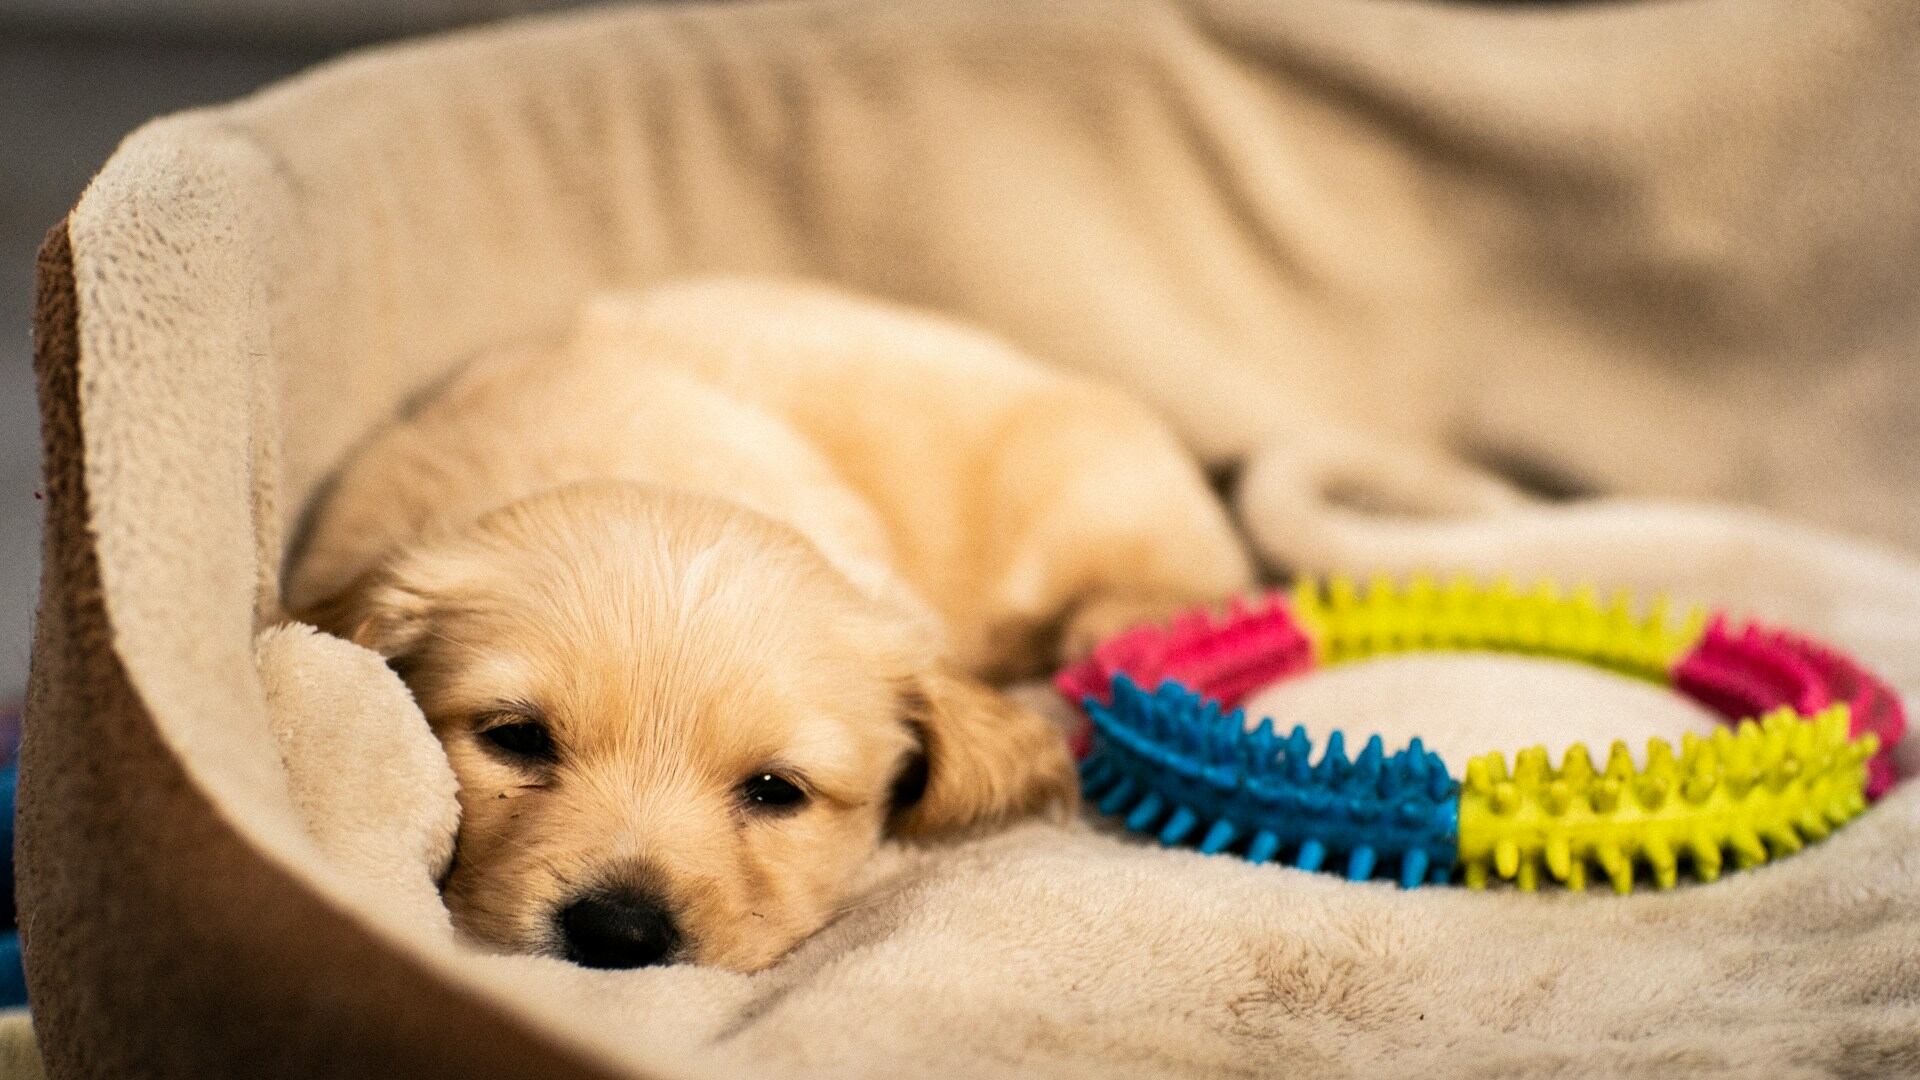 A tired puppy resting on a blanket next to a toy